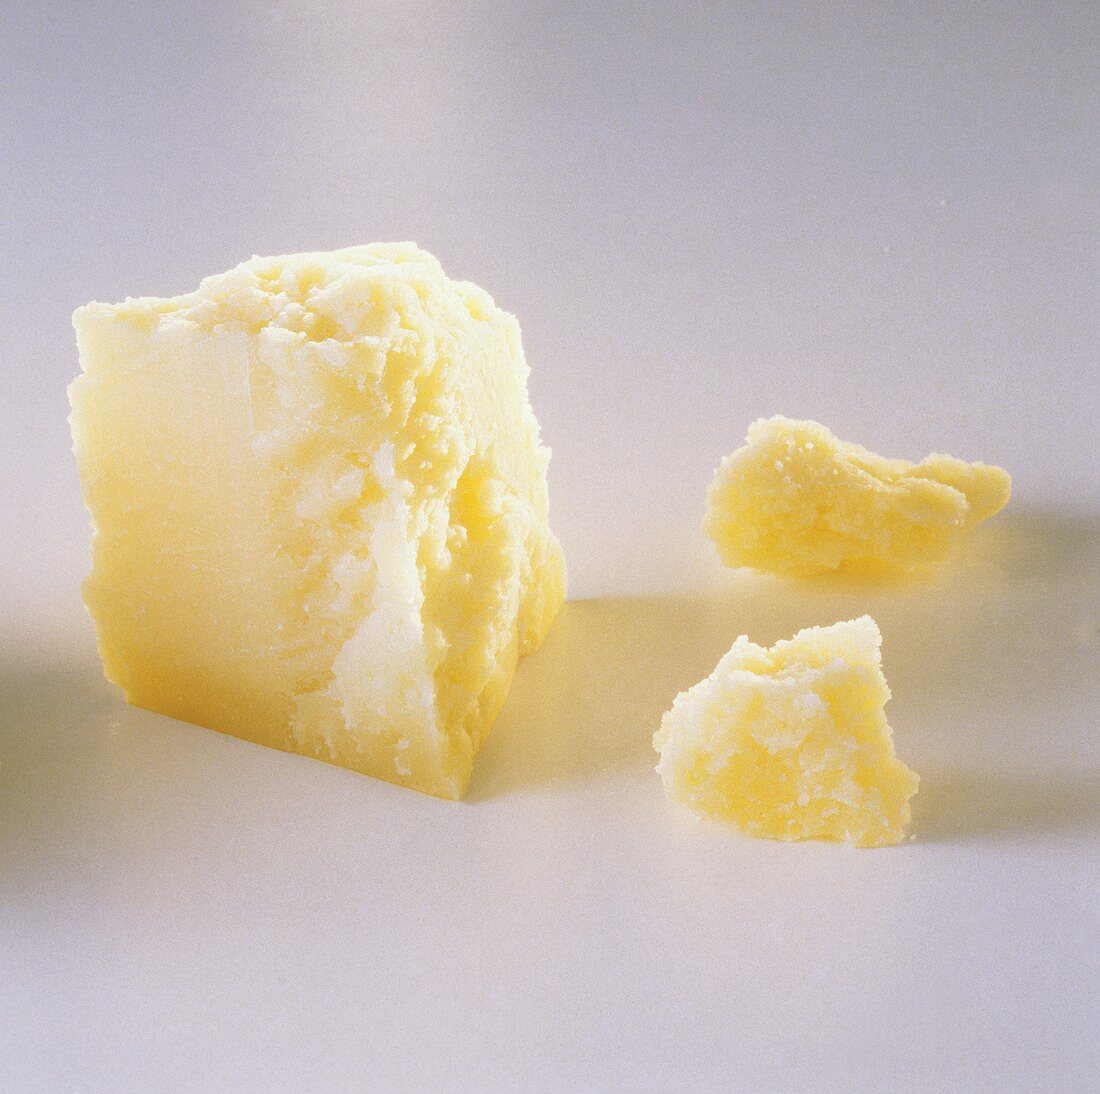 Large and small piece of Parmesan